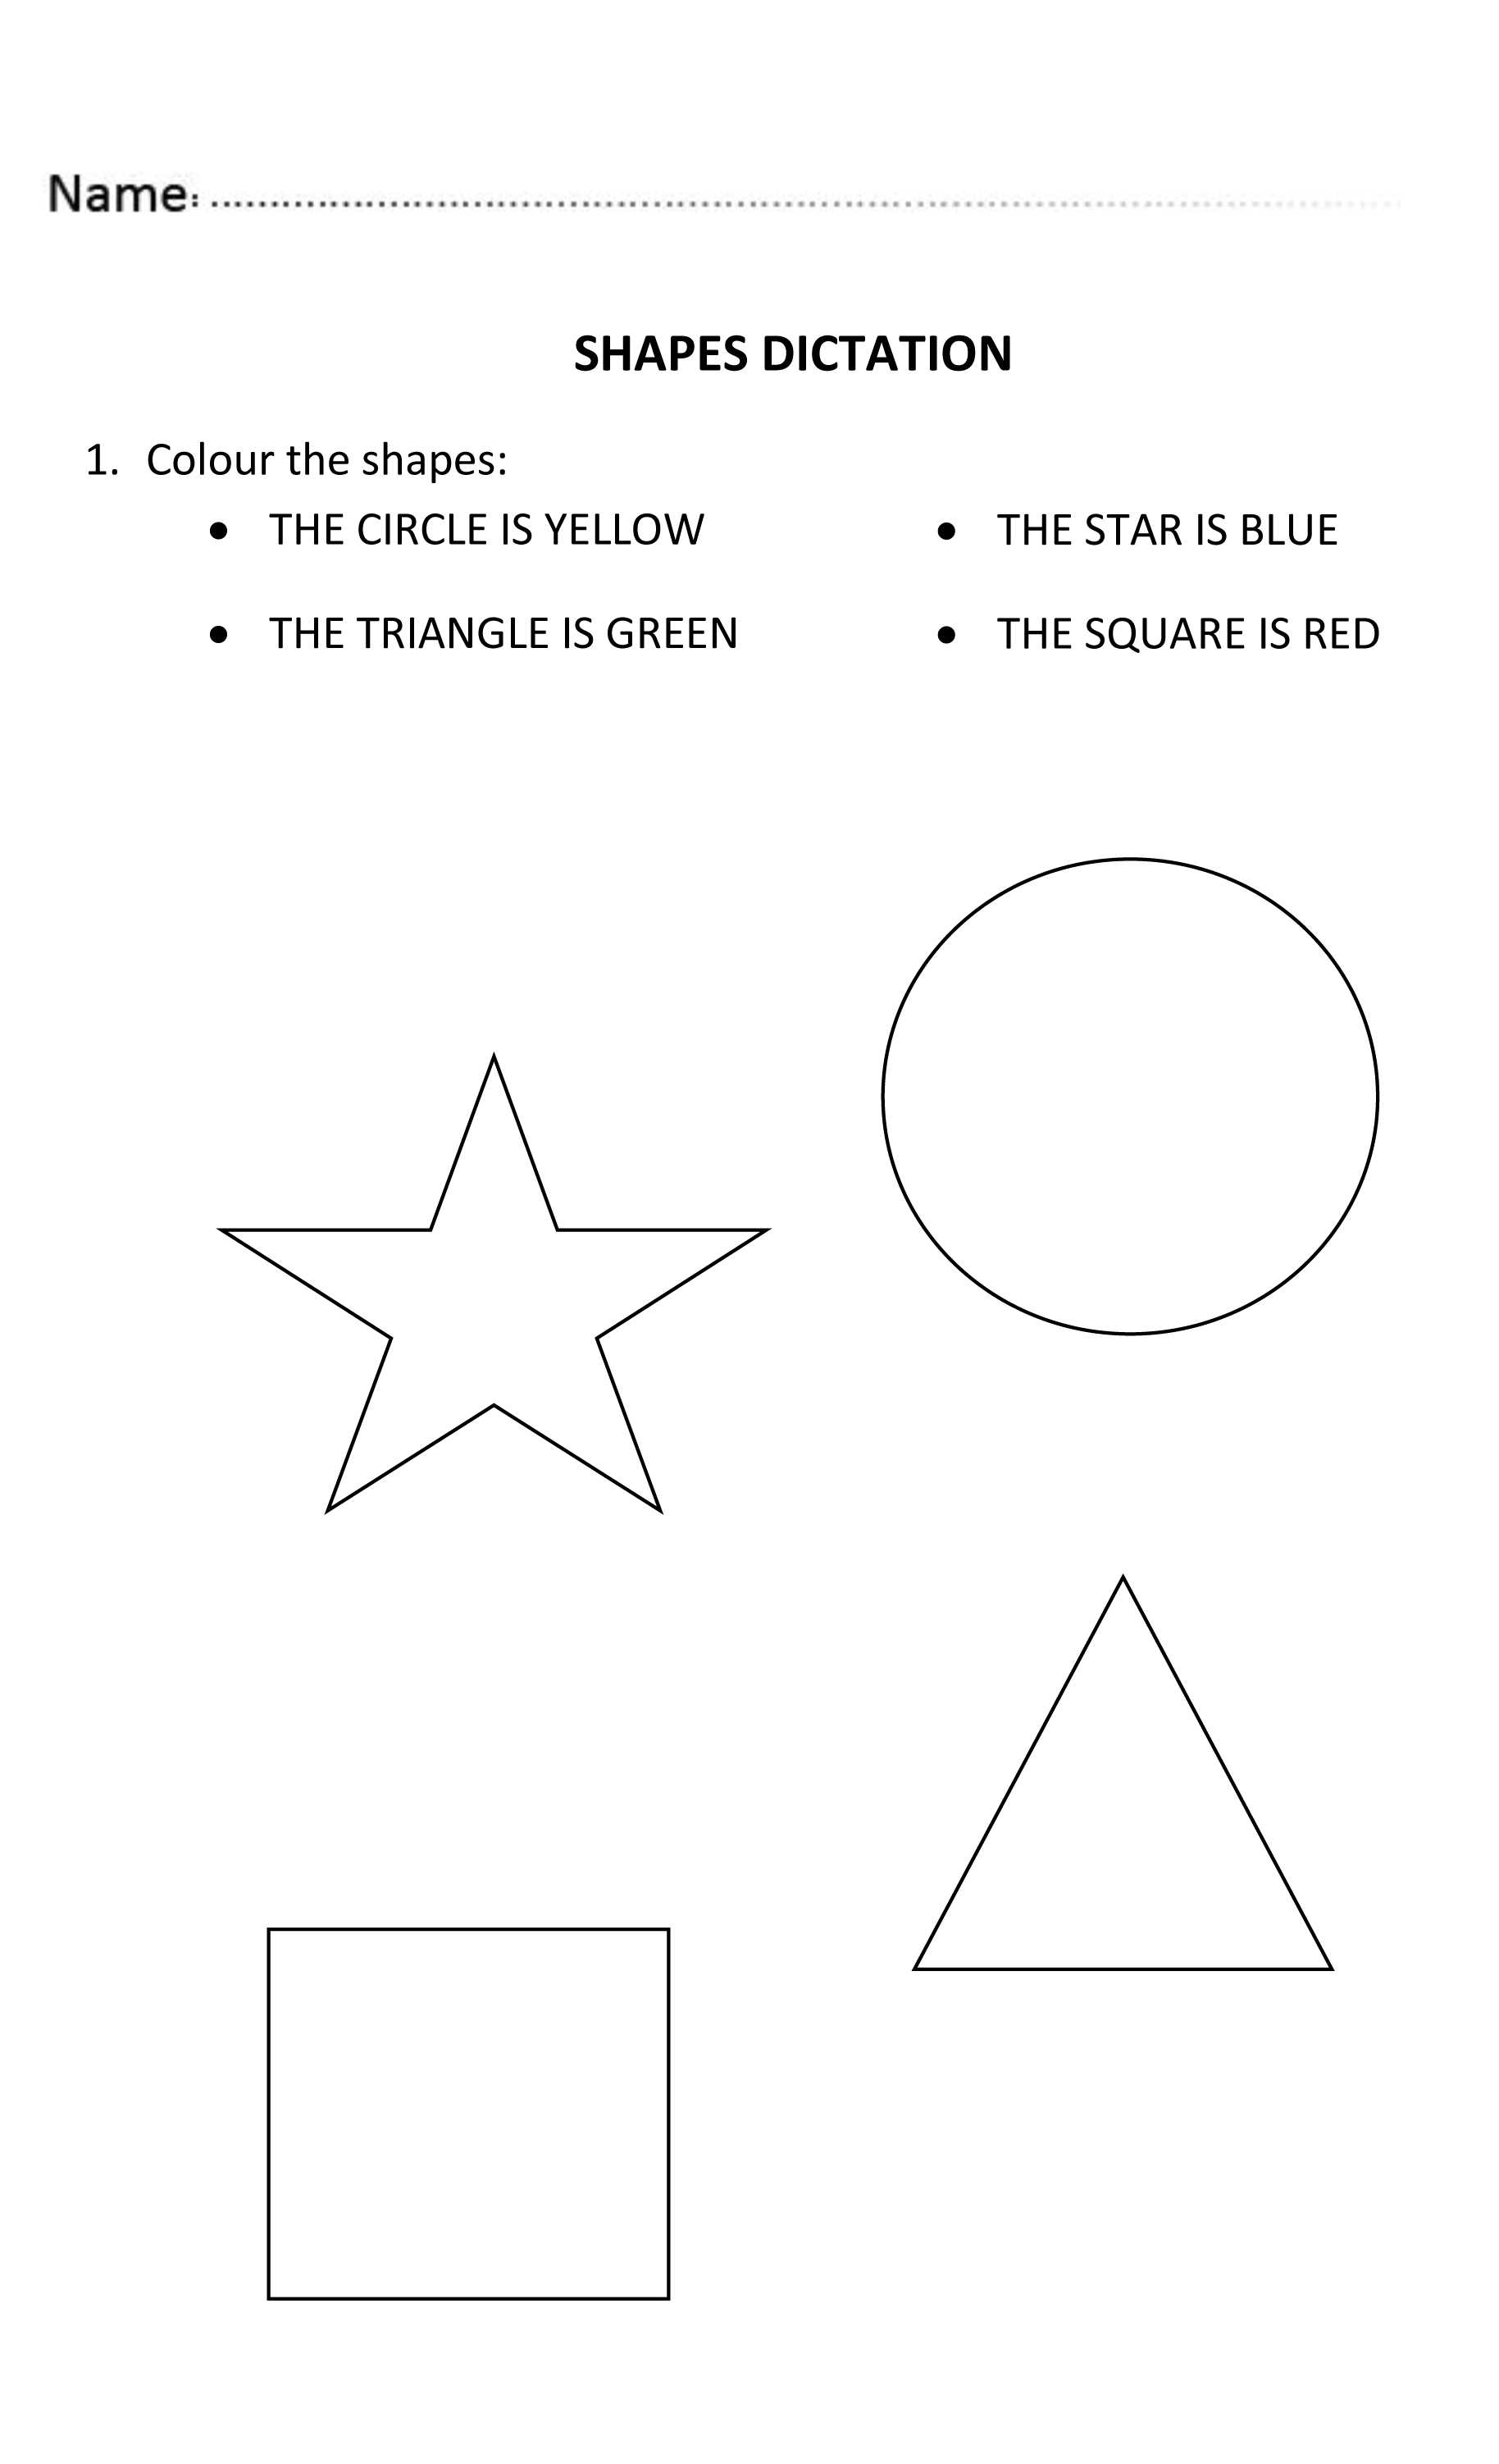 Traceable Name Worksheets or Fun Shapes Dictation for Nursery and Reception Students